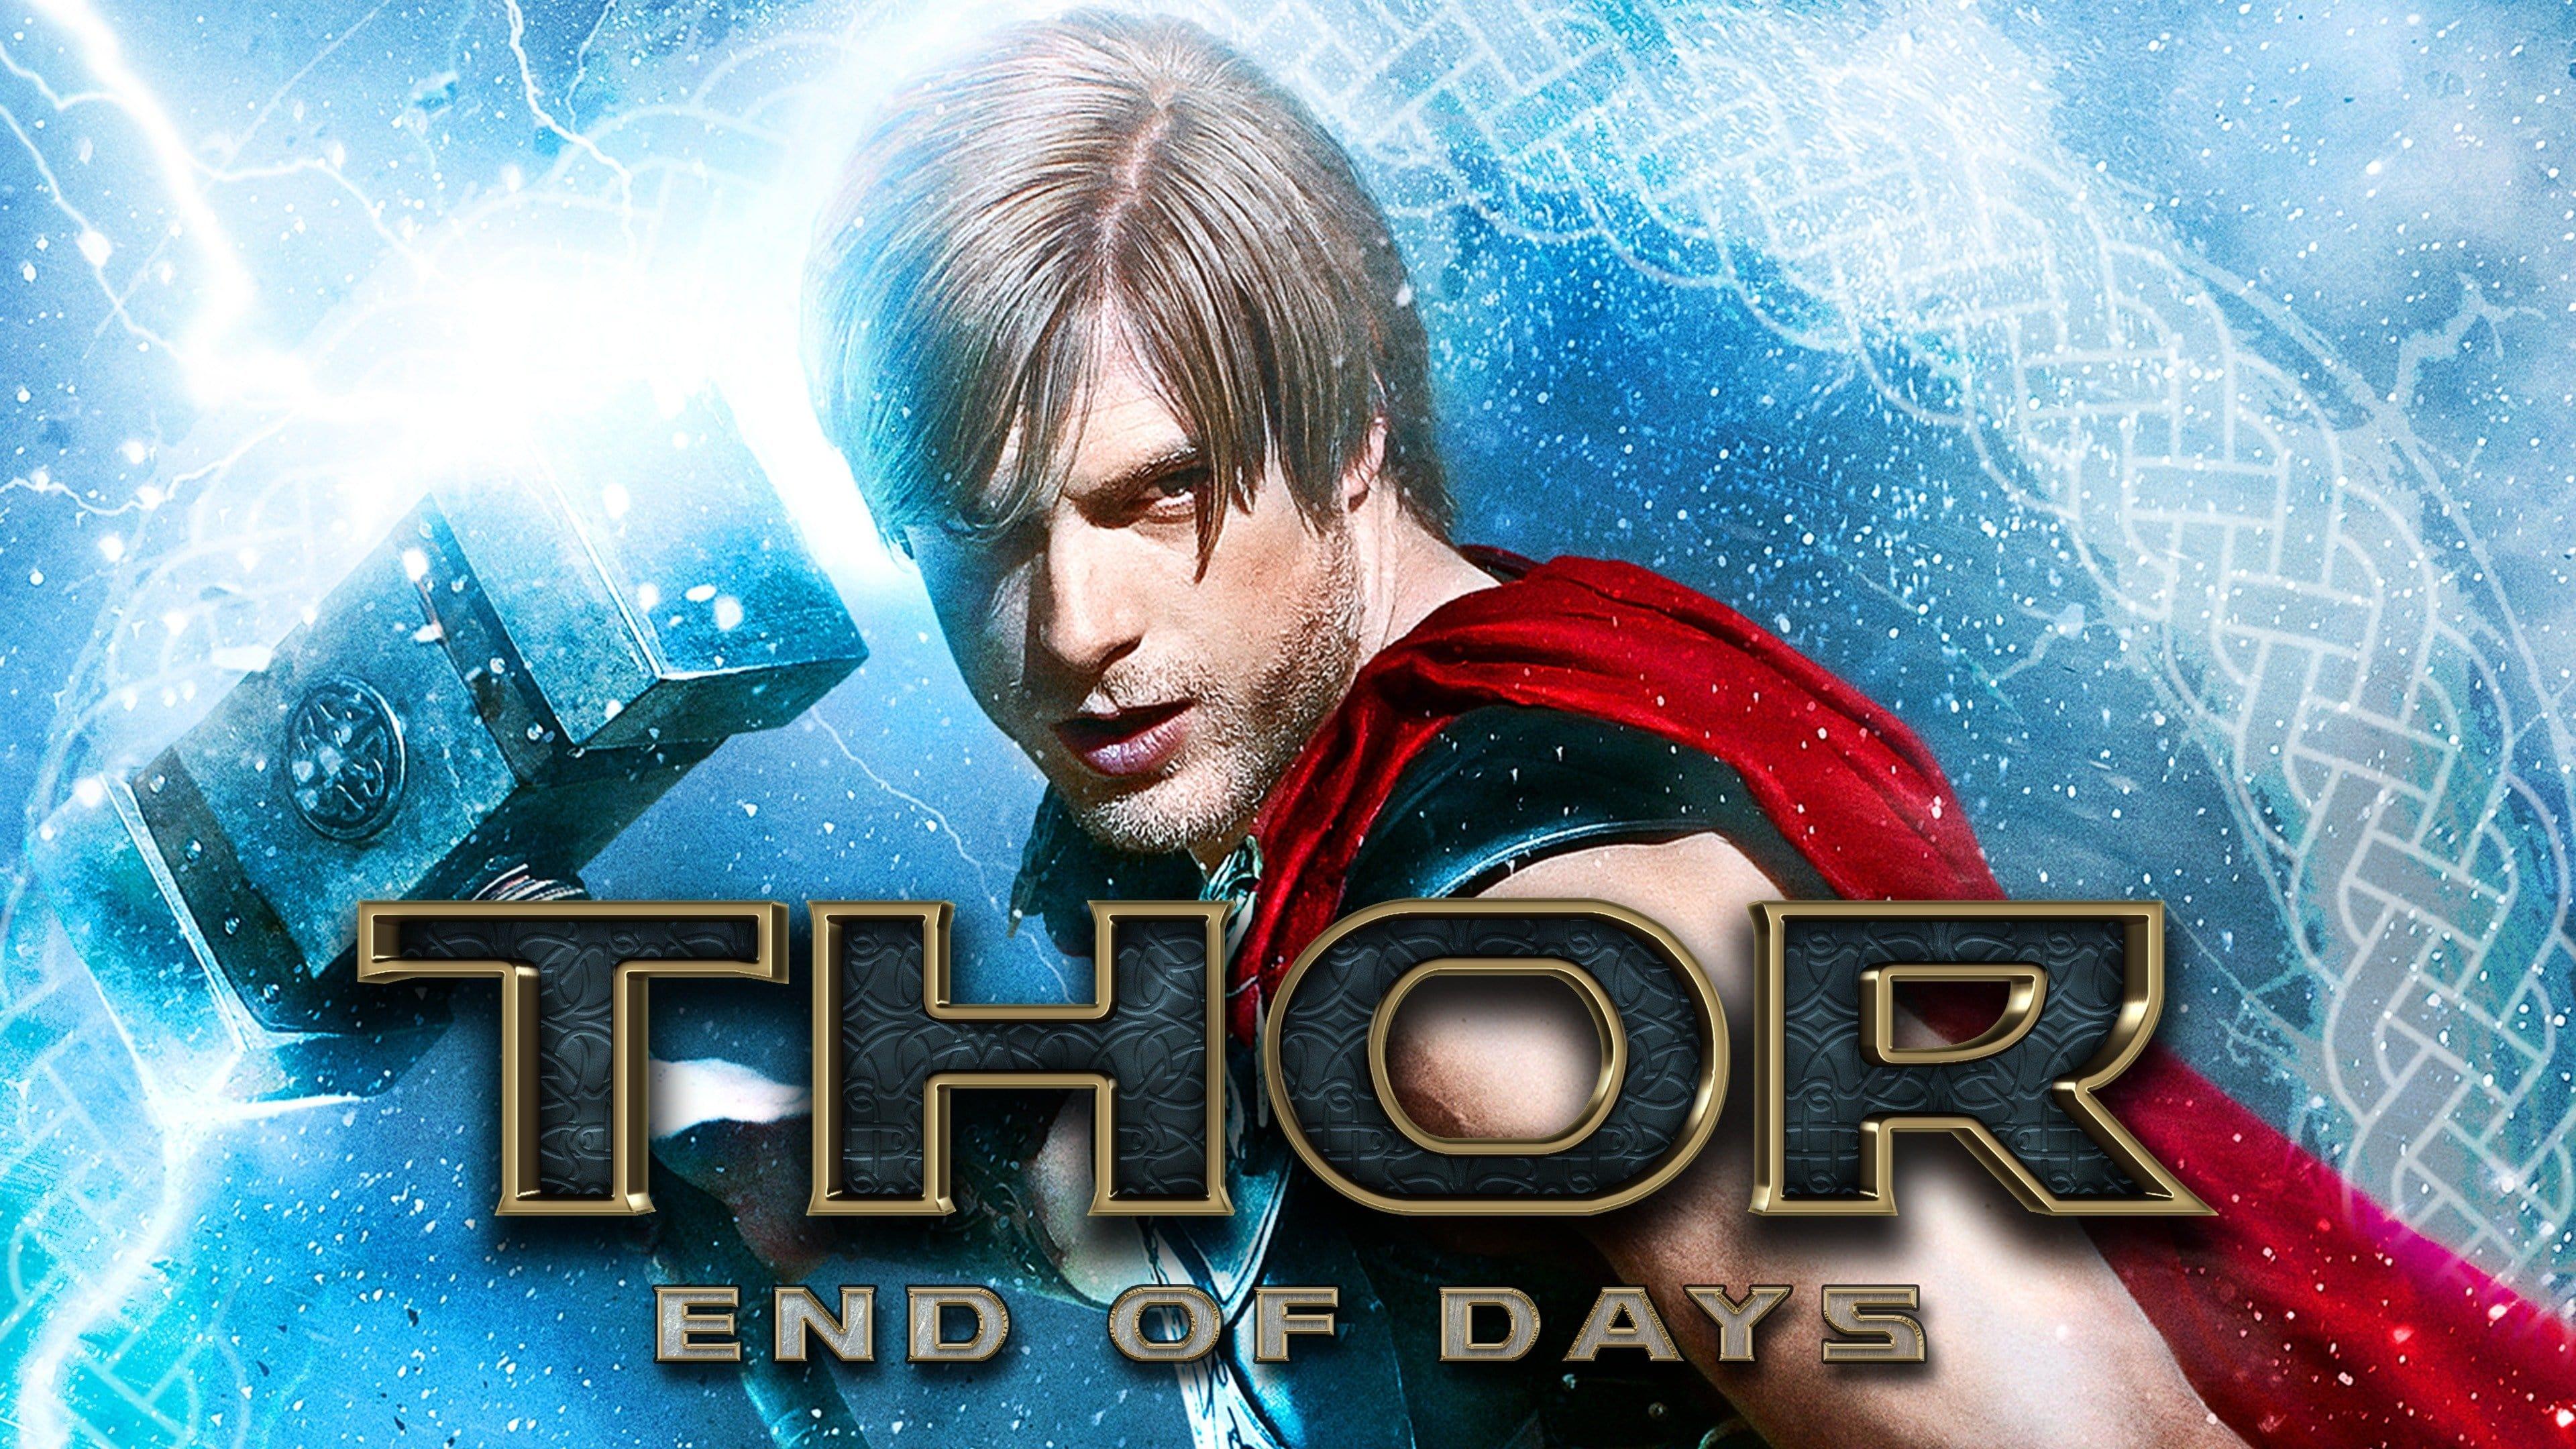 Thor: End of Days backdrop